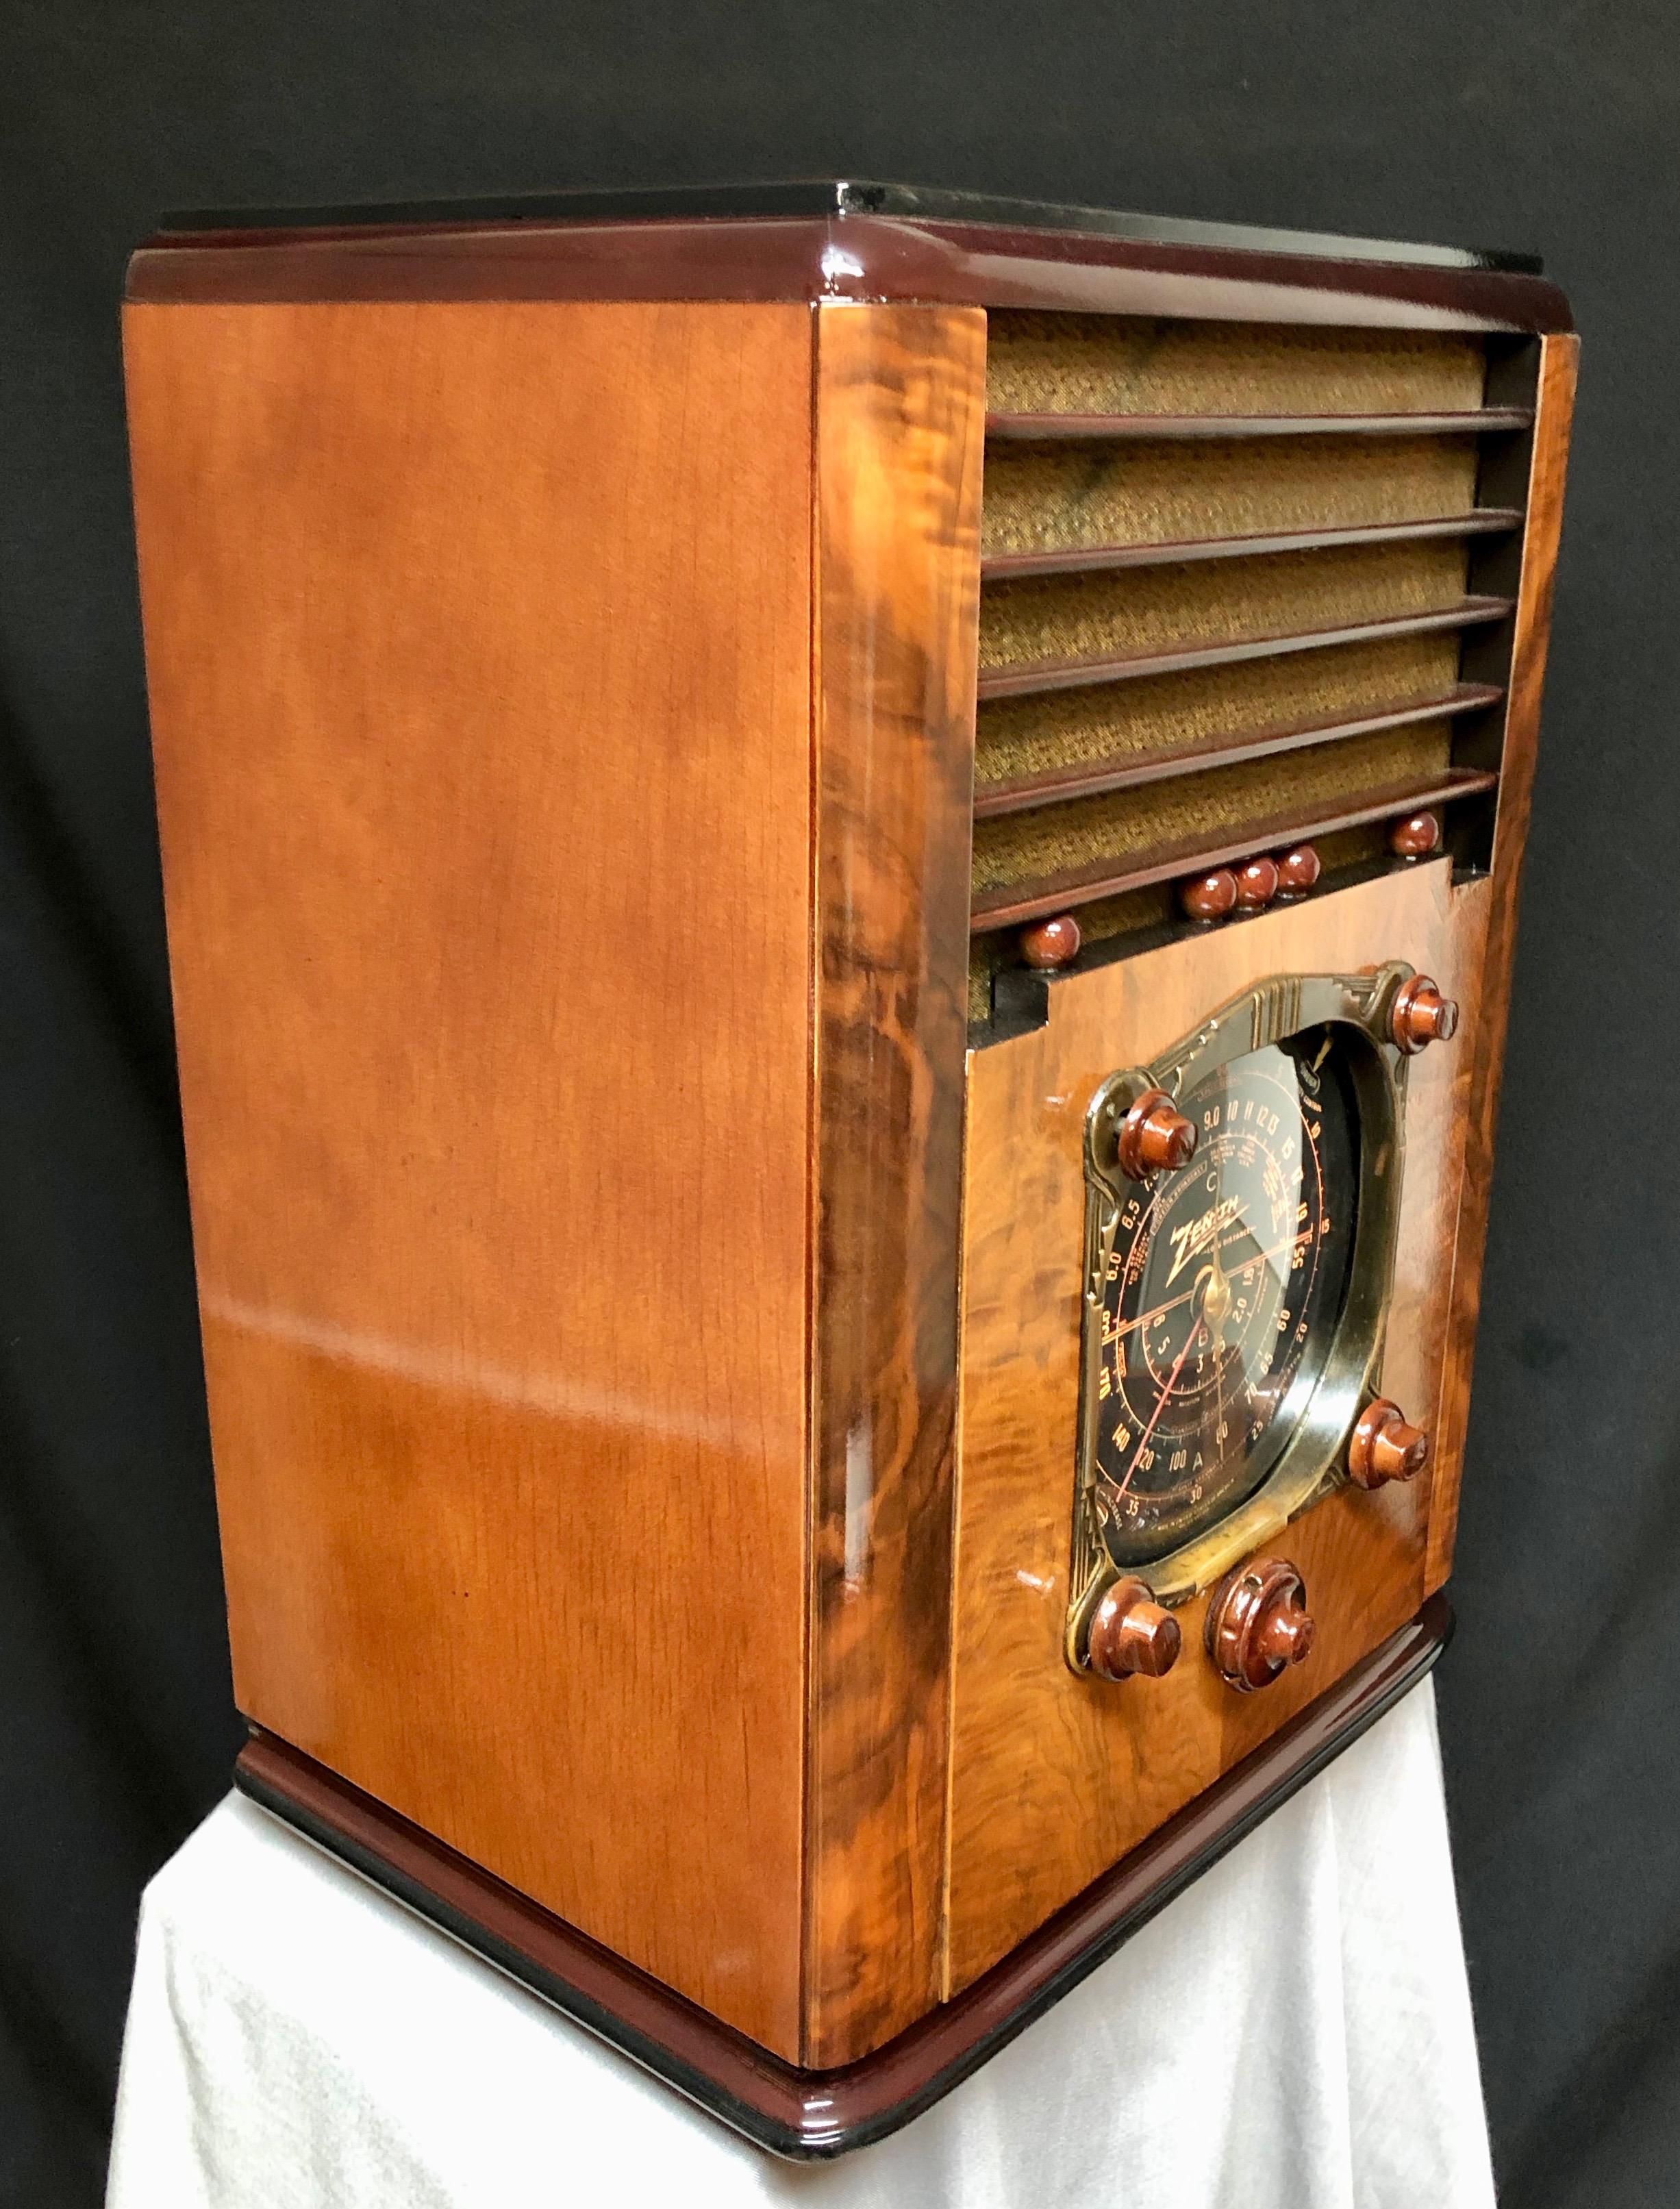 Original Zenith Radio model (1937) 6-S-330 Tombstone black dial tube radio and bluetooth. Fully restored mechanically and cosmetically as seen in the photos listed. This Art Deco period radio was part of the Glory Years 1936-1945 of Zenith radio